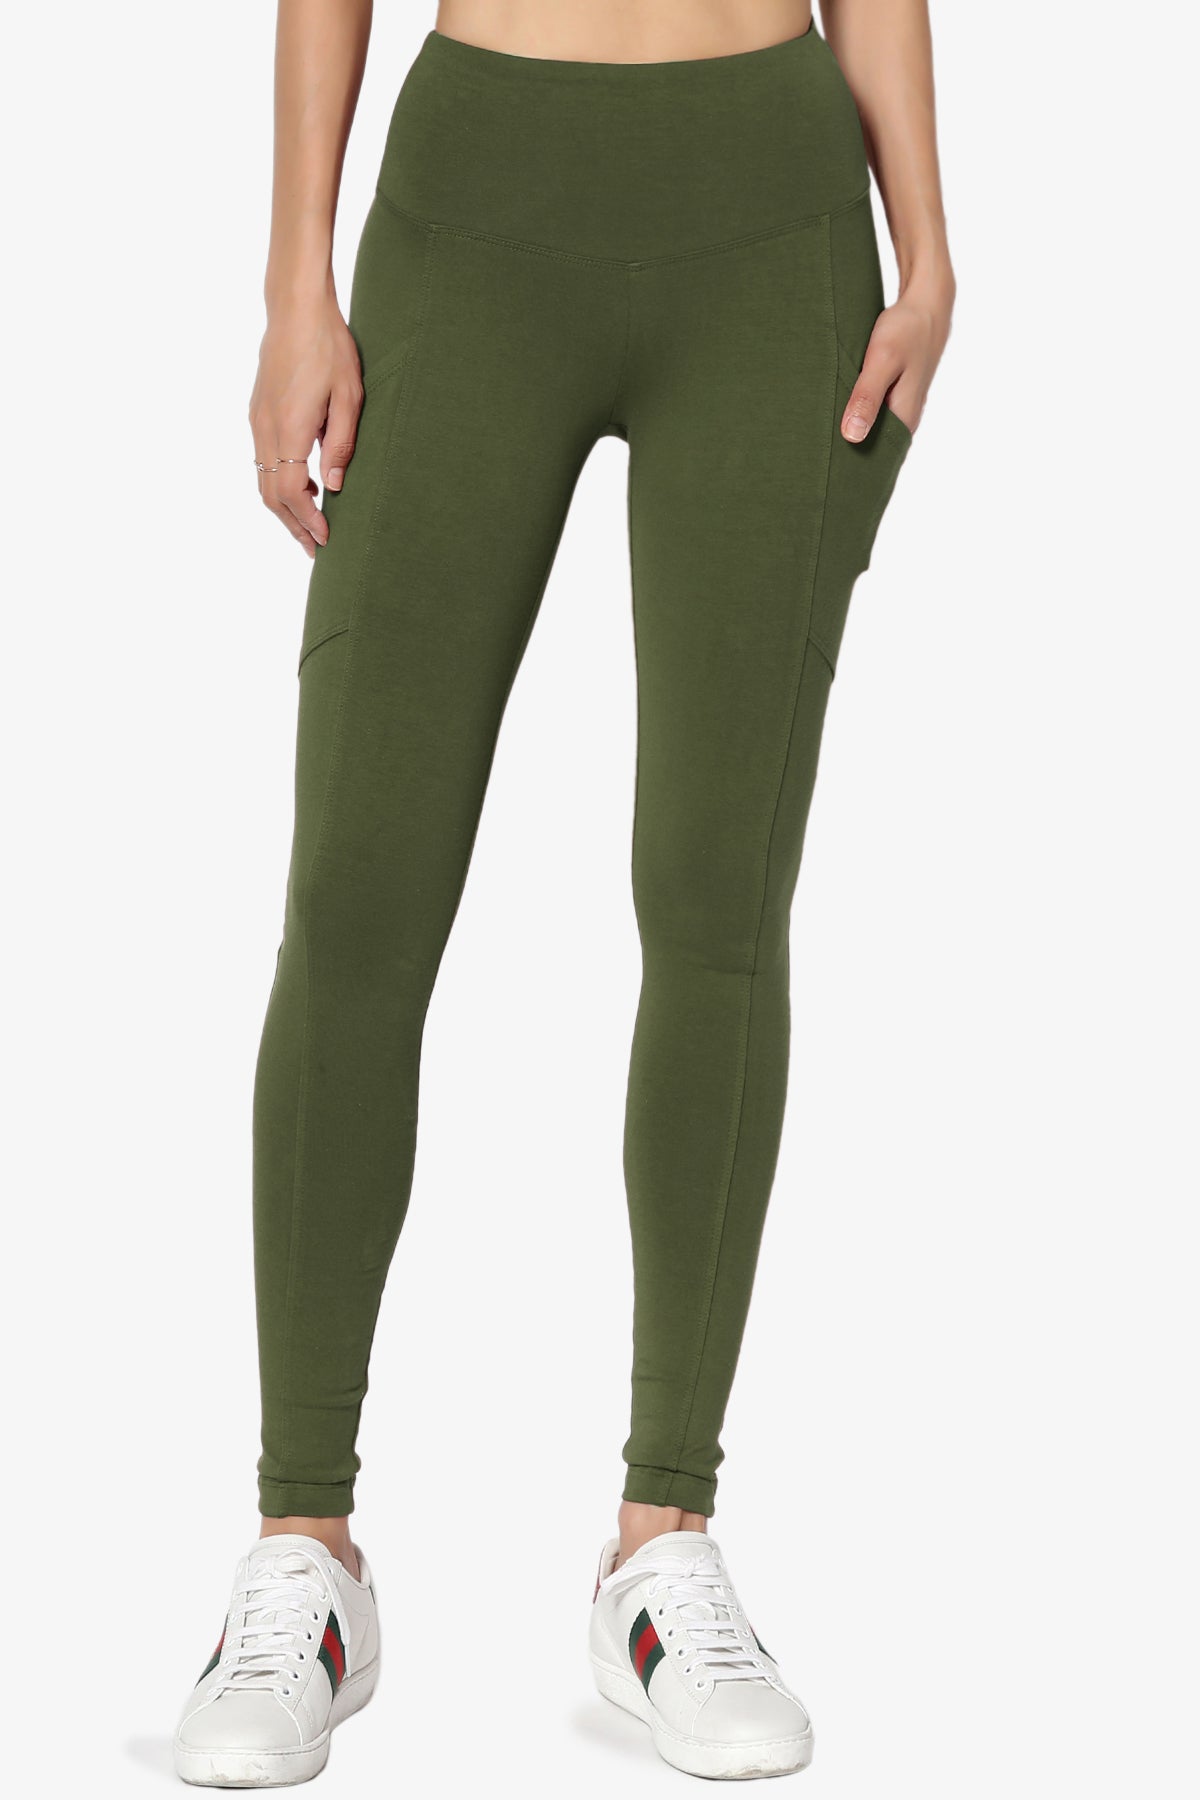 Olive green cotton leggings with pockets  Cotton leggings, Green cotton,  Pants for women